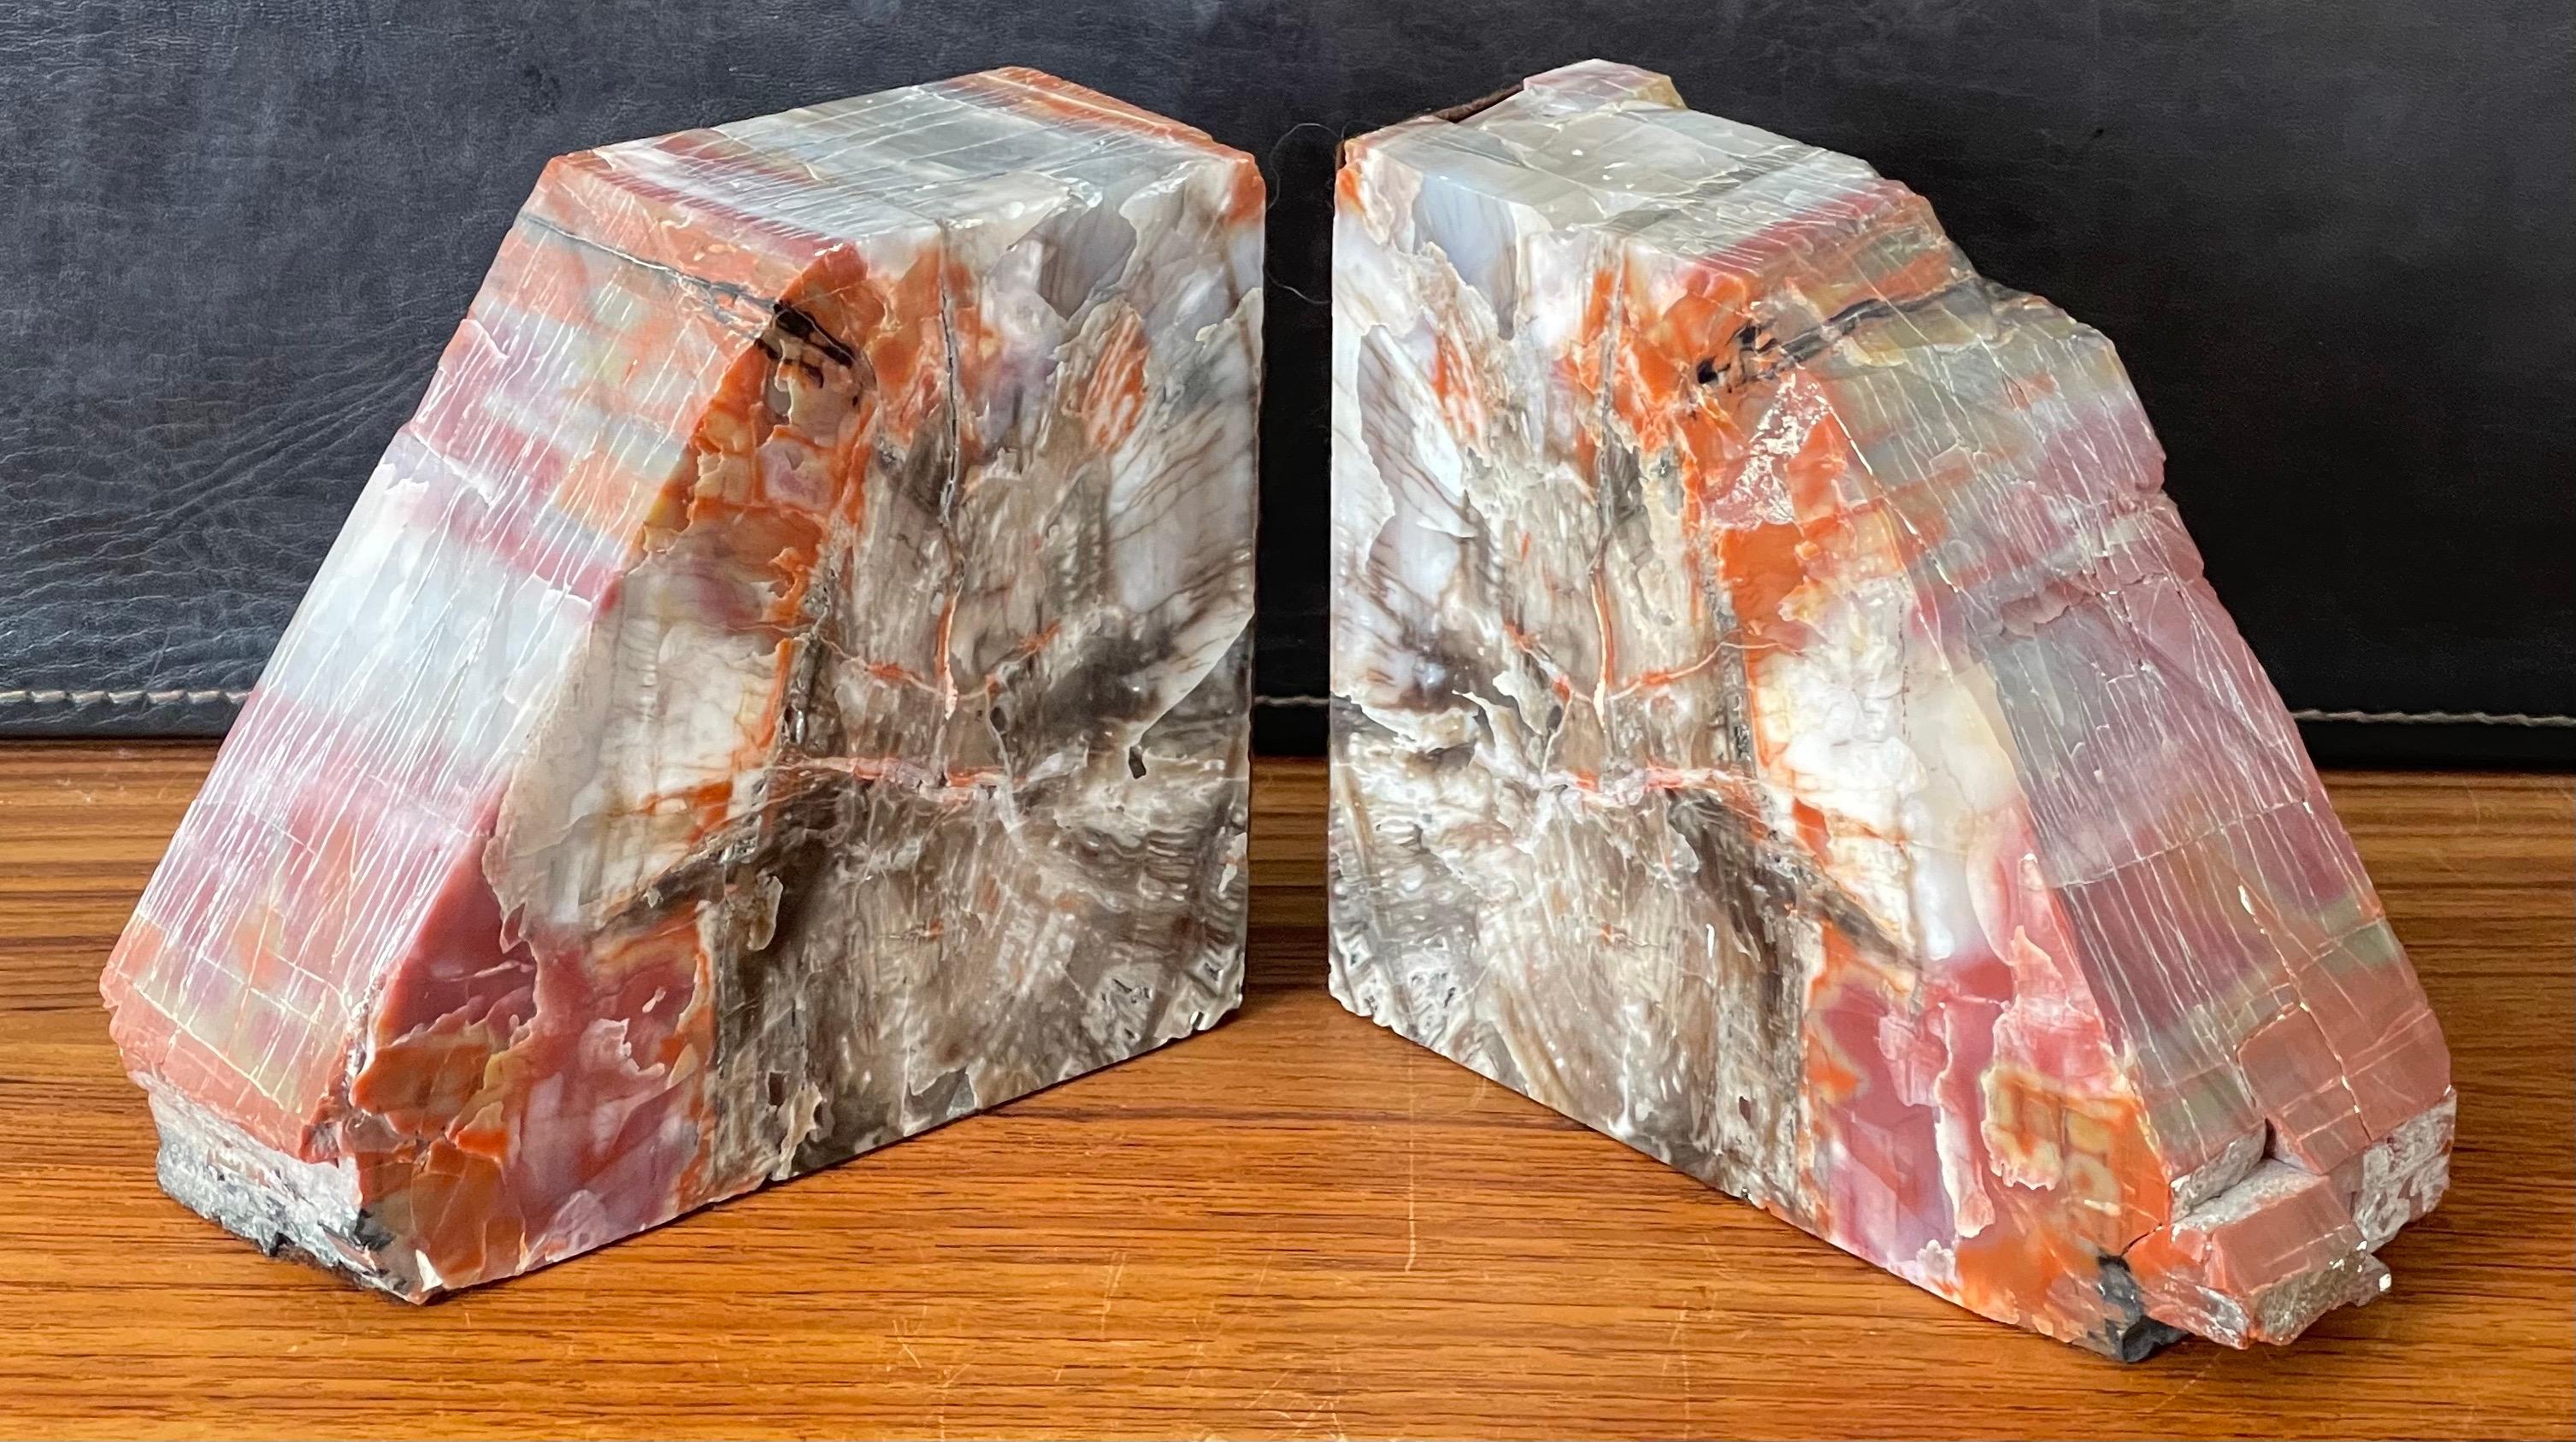 An impressive pair of large petrified wood bookends, circa pre-history from Arizona. Brightly colored tan, cream, grey, black and red tones with naturally formed patterns caused by fossilization over millions of years. Finished with a highly